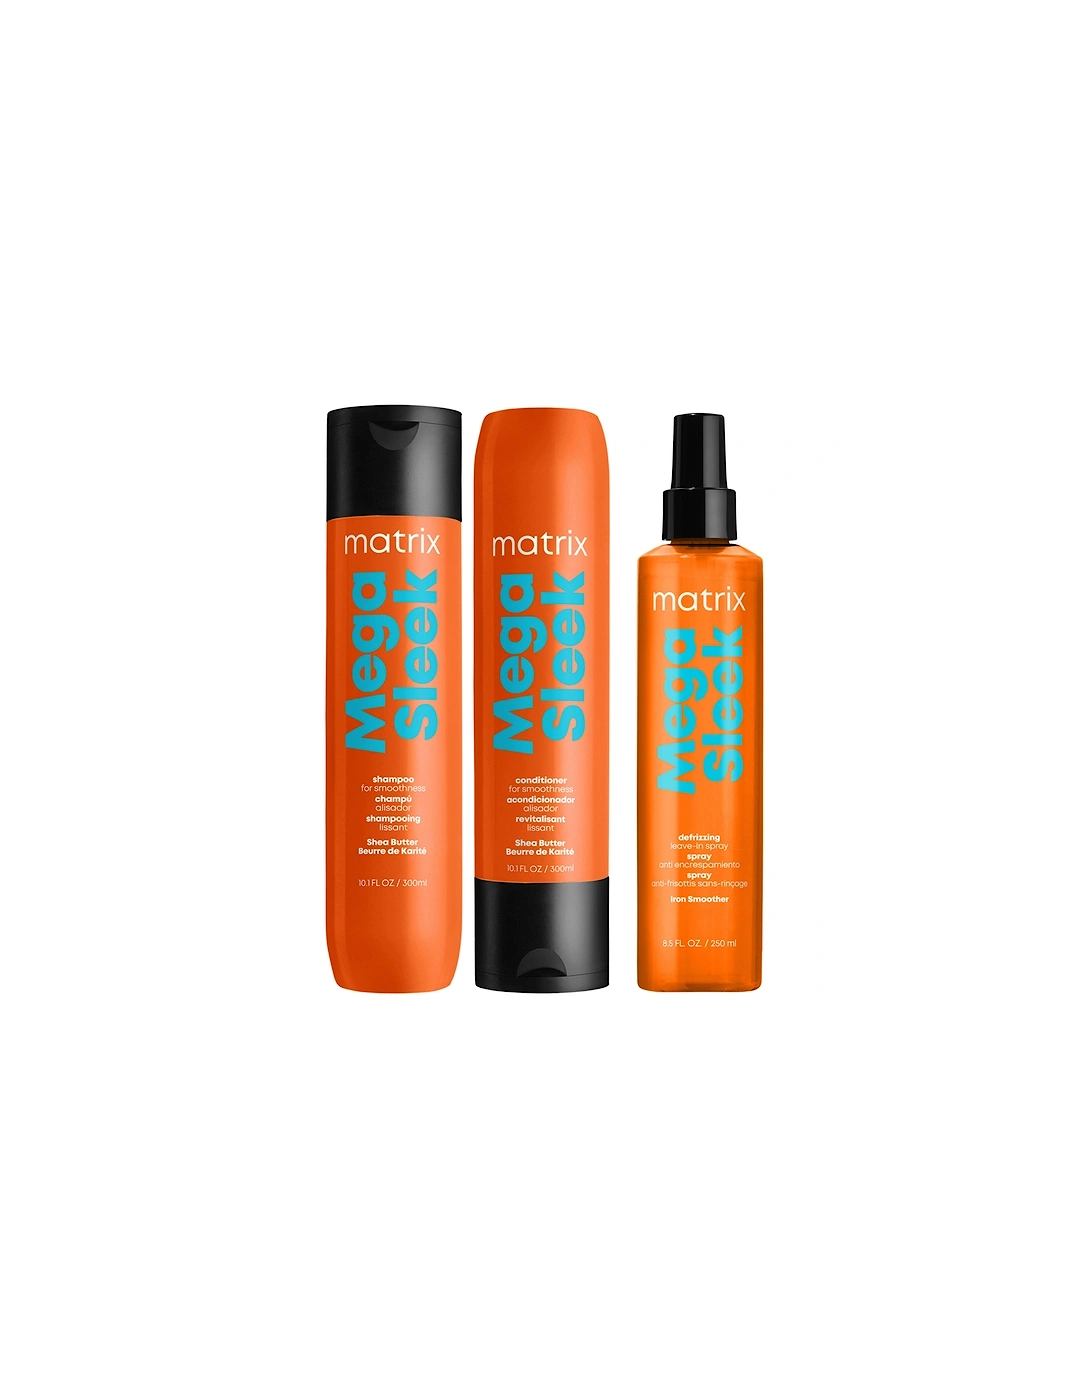 Mega Sleek Shea Butter Smoothing Shampoo, Conditioner and Iron Smoother Heat Protection Routine for Frizzy Hair, 2 of 1